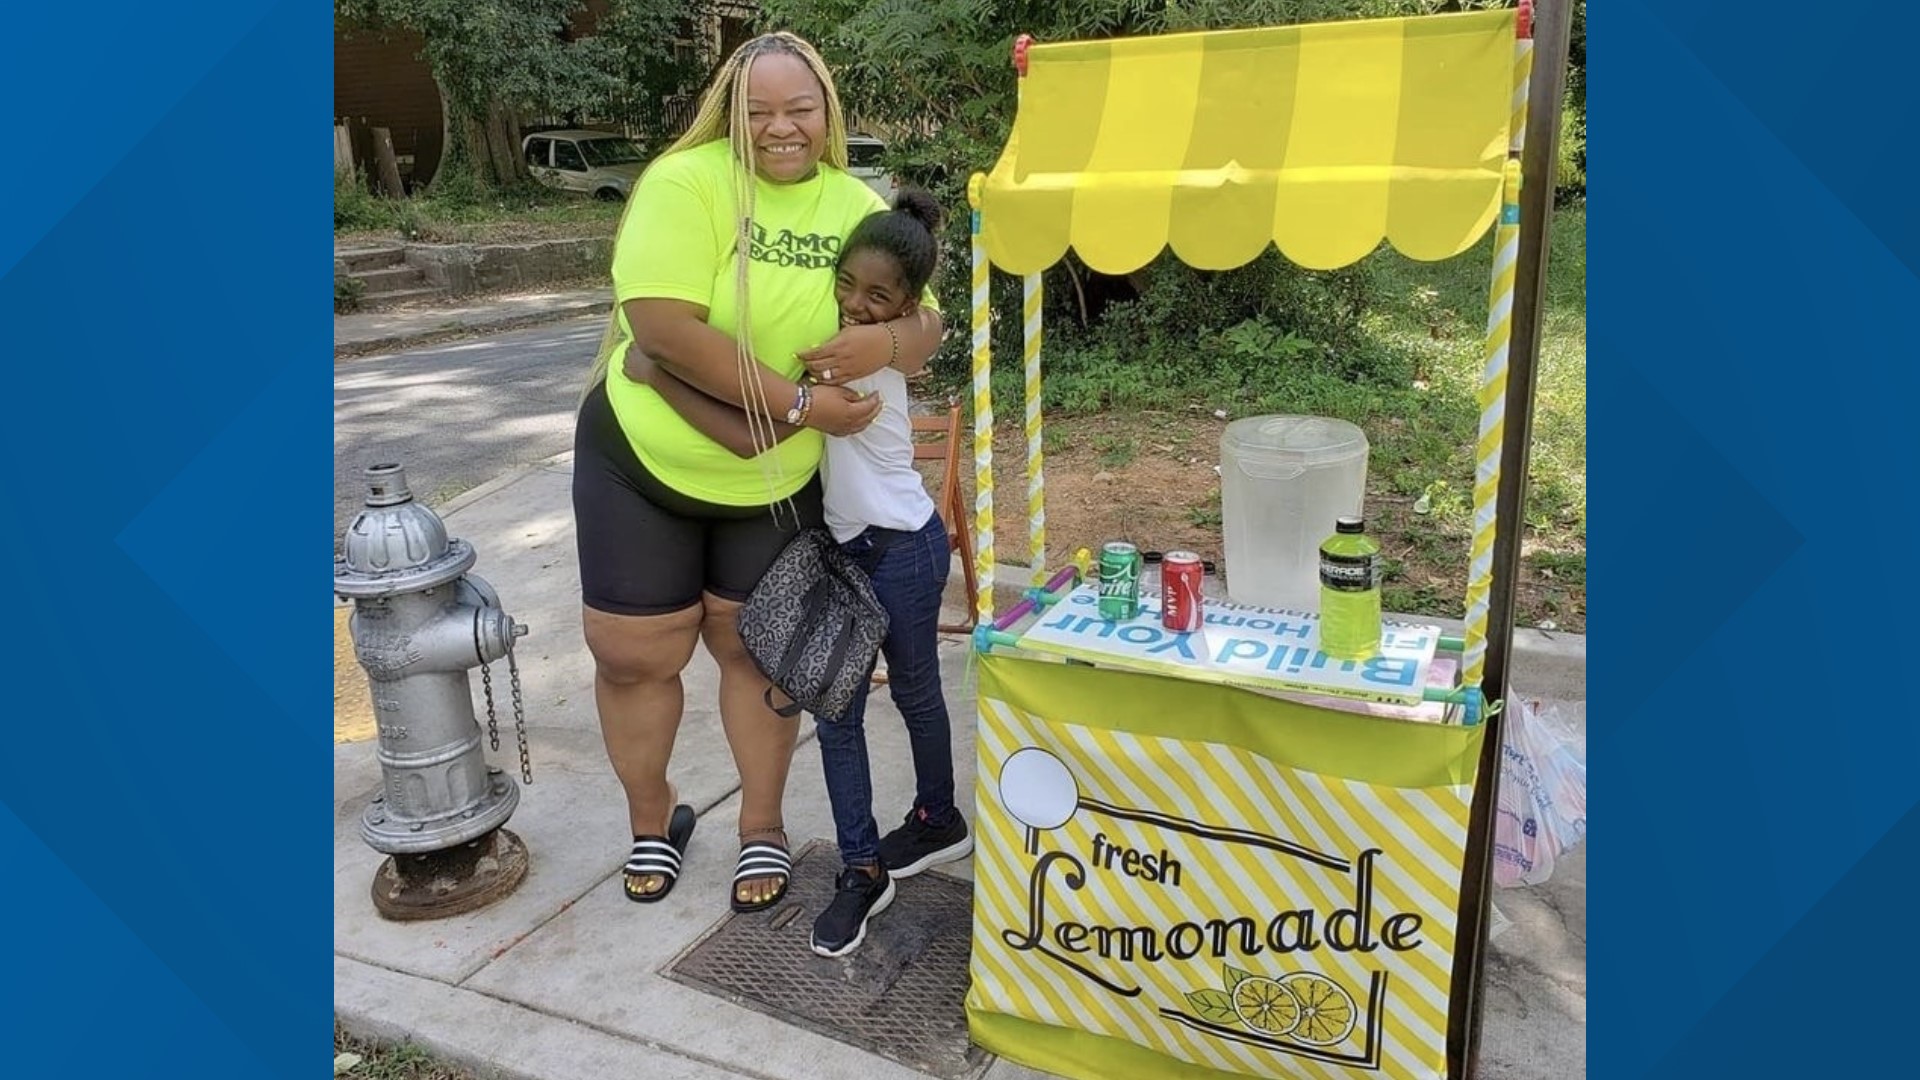 Trinity White is starting a trend of little entrepreneurs on the Westside. She inspired 12-year-old Charlee Medley to open a coffee stand right down the street.